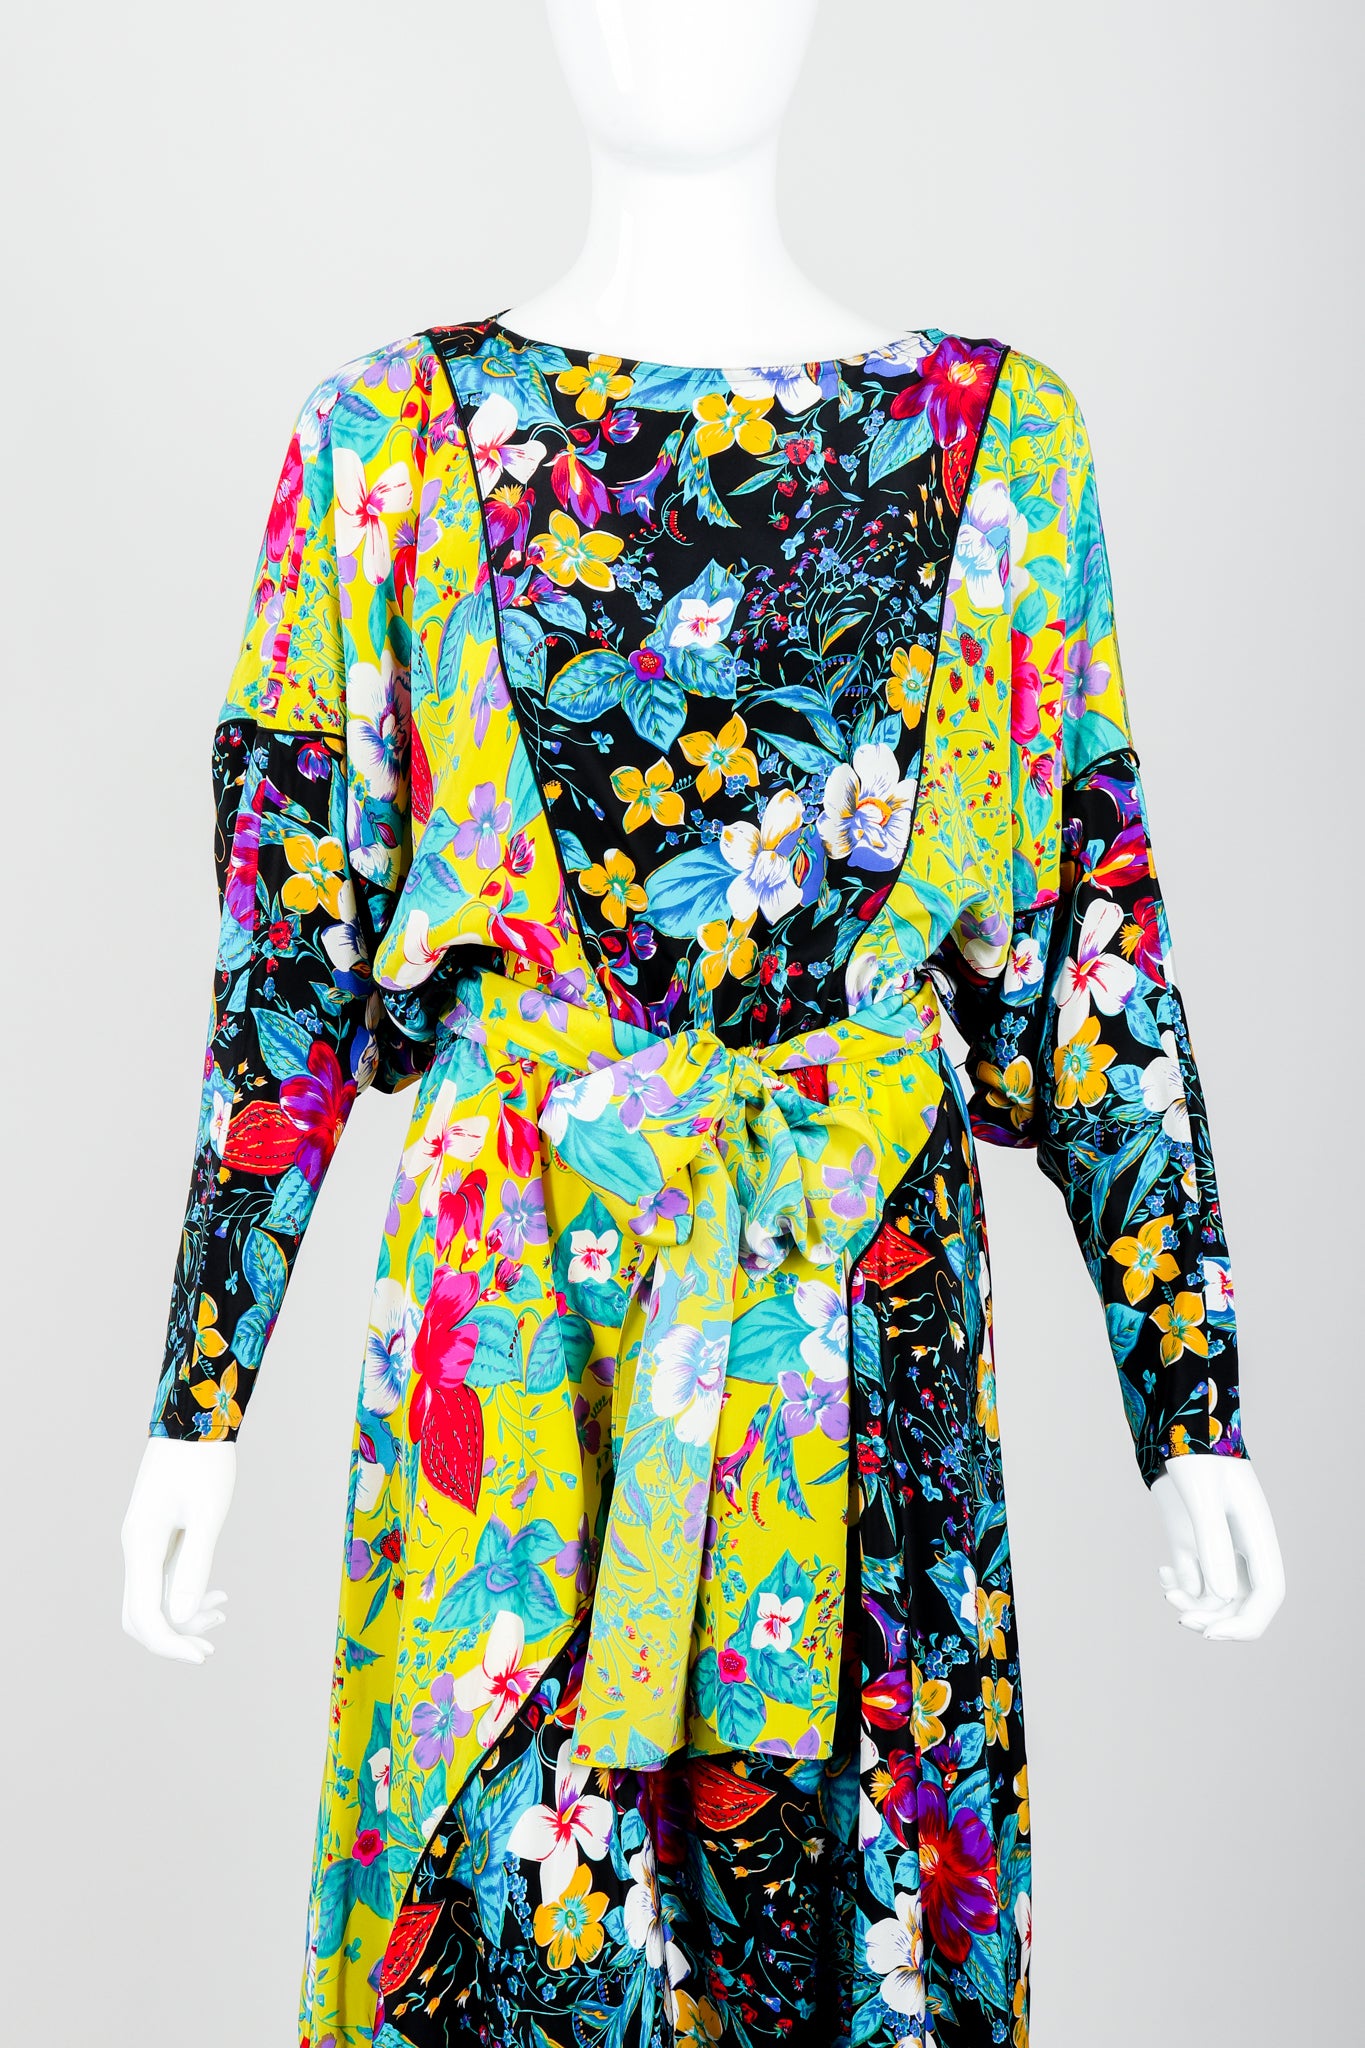 Vintage Rickie Freeman for Teri Jon Floral Batwing Dress on Mannequin Front Crop at Recess